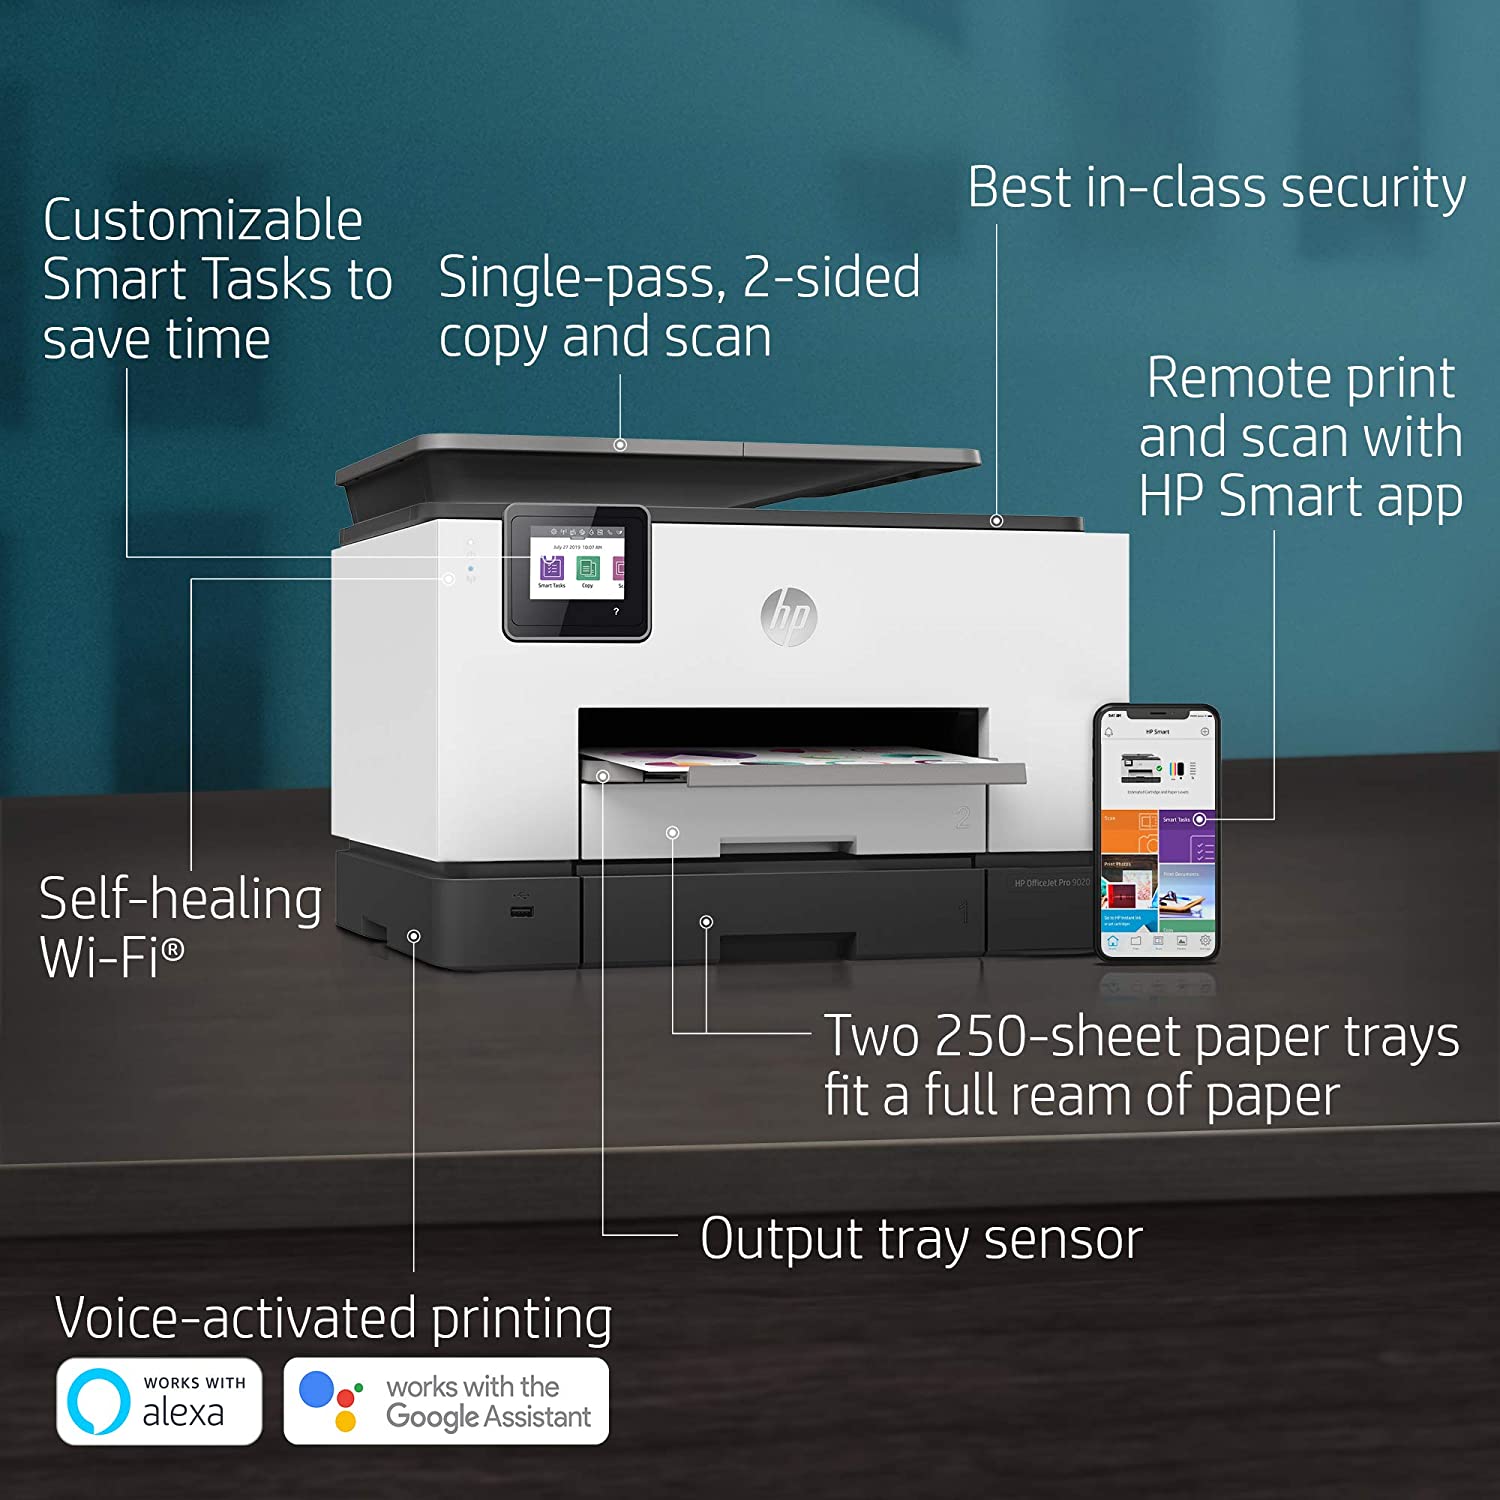 HP OfficeJet Pro 9020 All-in-One Printer Features like Smart Tasks and the scanbed's easy slide off glass help increase productivity and save time-408559